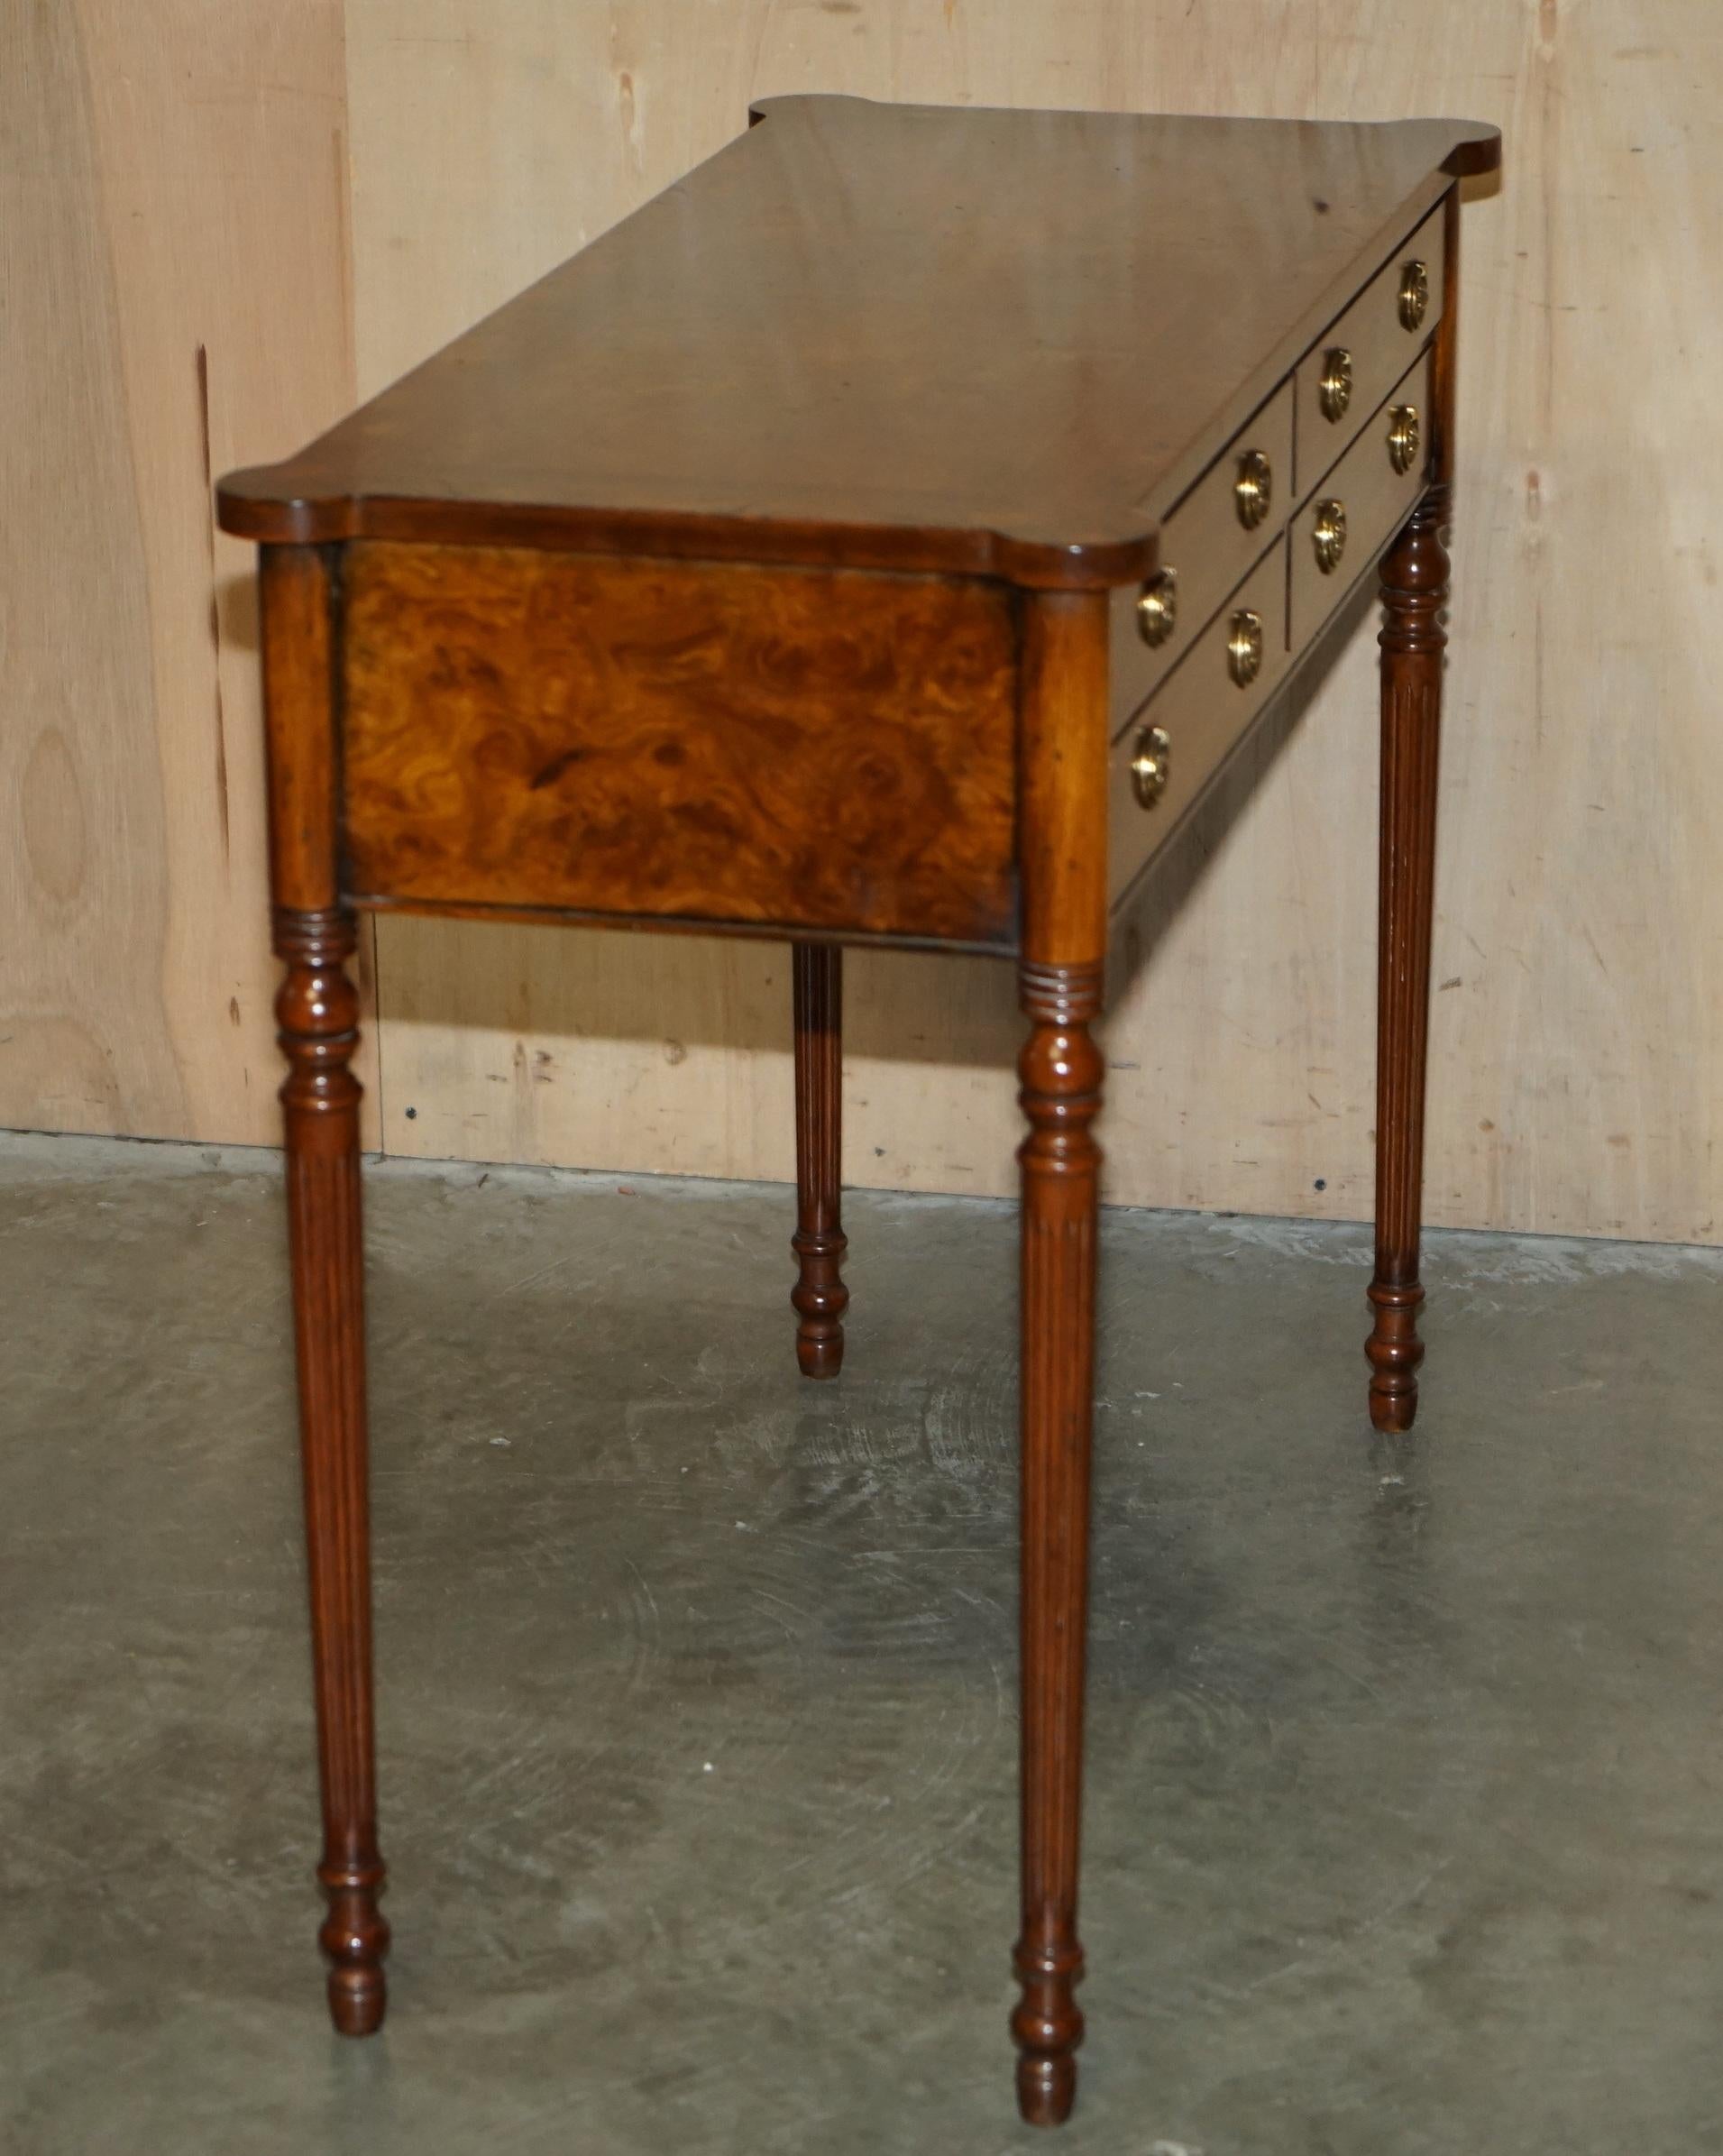 EXQUISITE CIRCA 1920 BURR ELM & SATiNWOOD FRENCH POLISHED RESTORED CONSOLE TABLE im Angebot 6